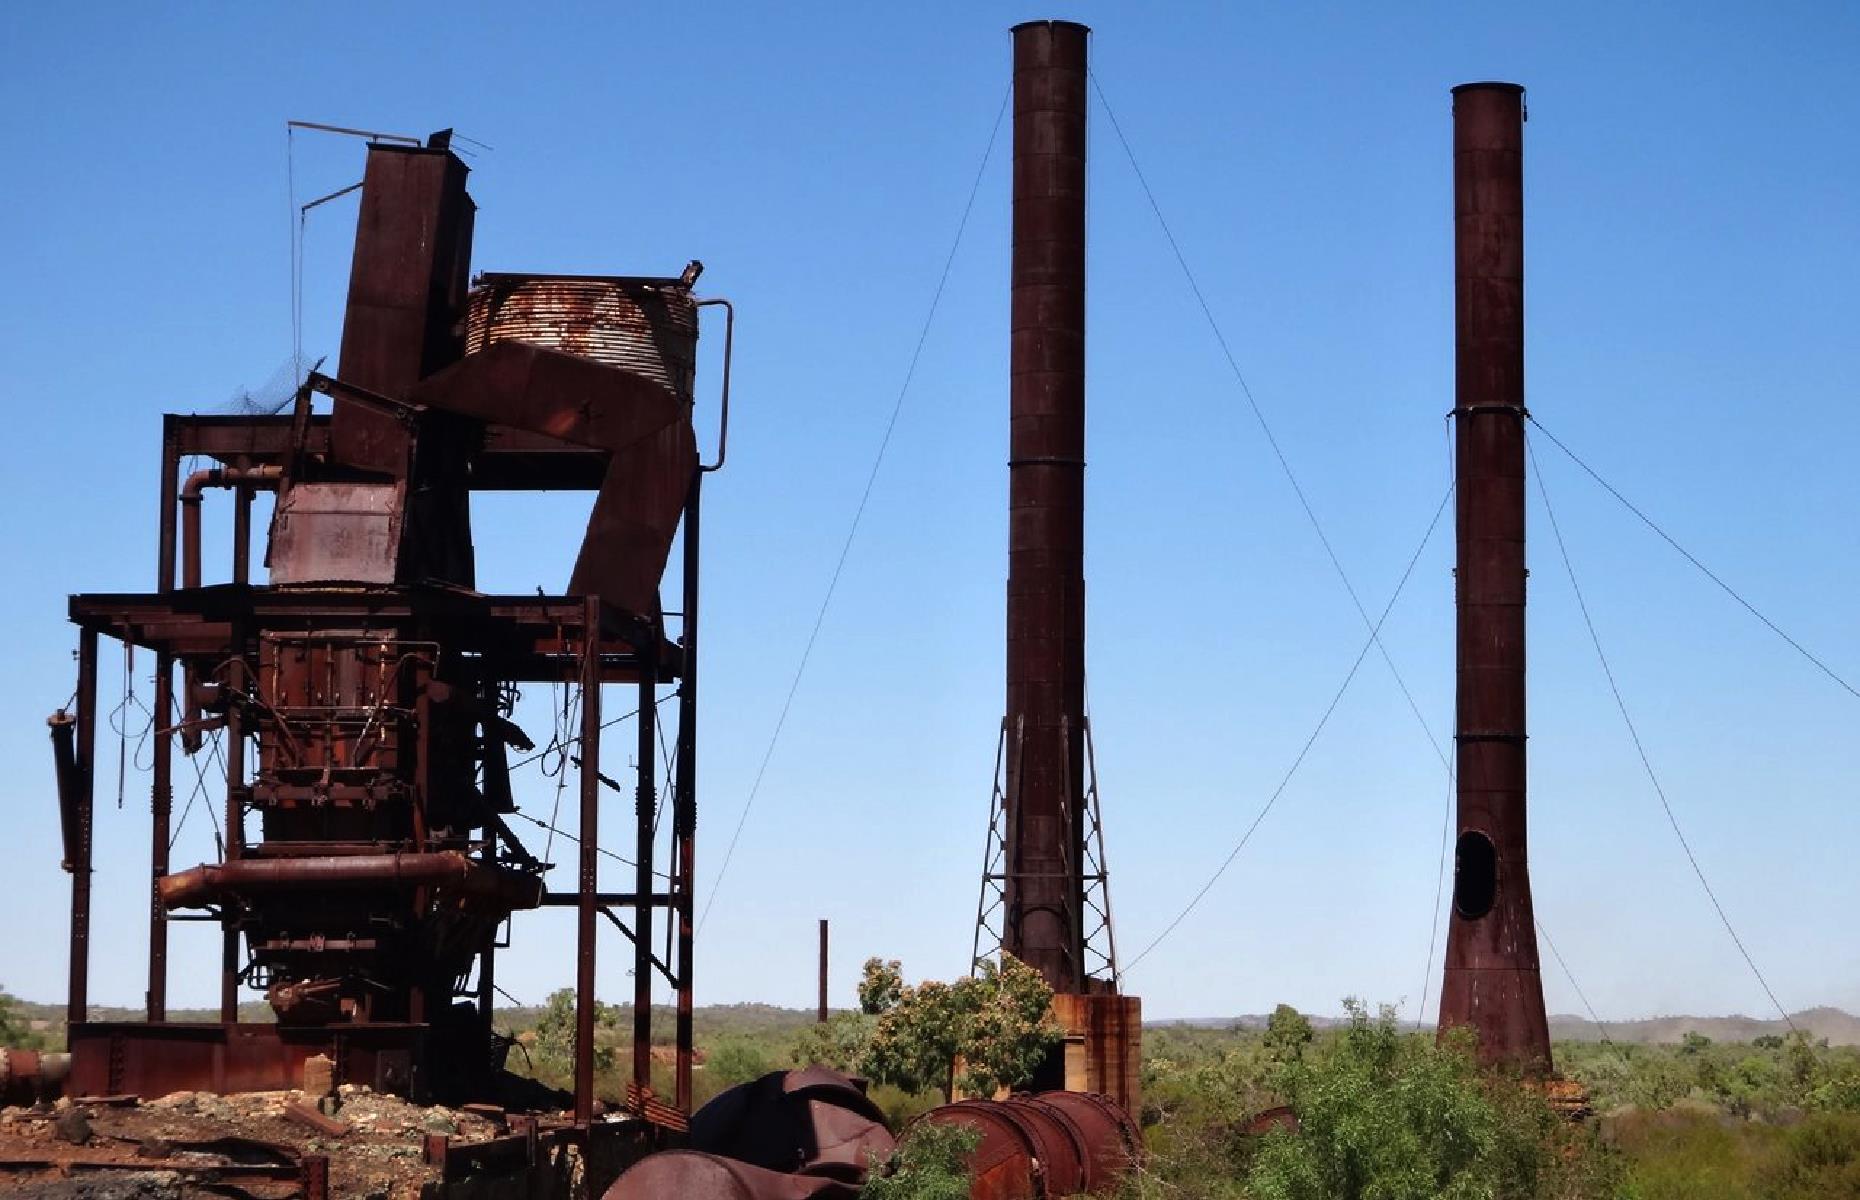 The towering iron chimneys of a disused smelter rising out of the dusty Queensland outback are among the few structures that remain of old mining town Kuridala, near Mount Isa. The town was established after copper, gold and silver were discovered here in 1884. As workers flocked in it grew to accommodate them with dance halls, hotels, stores and even a picture house opening. By 1928, though, the operations closed, the town pretty much emptied and nature reclaimed the space.